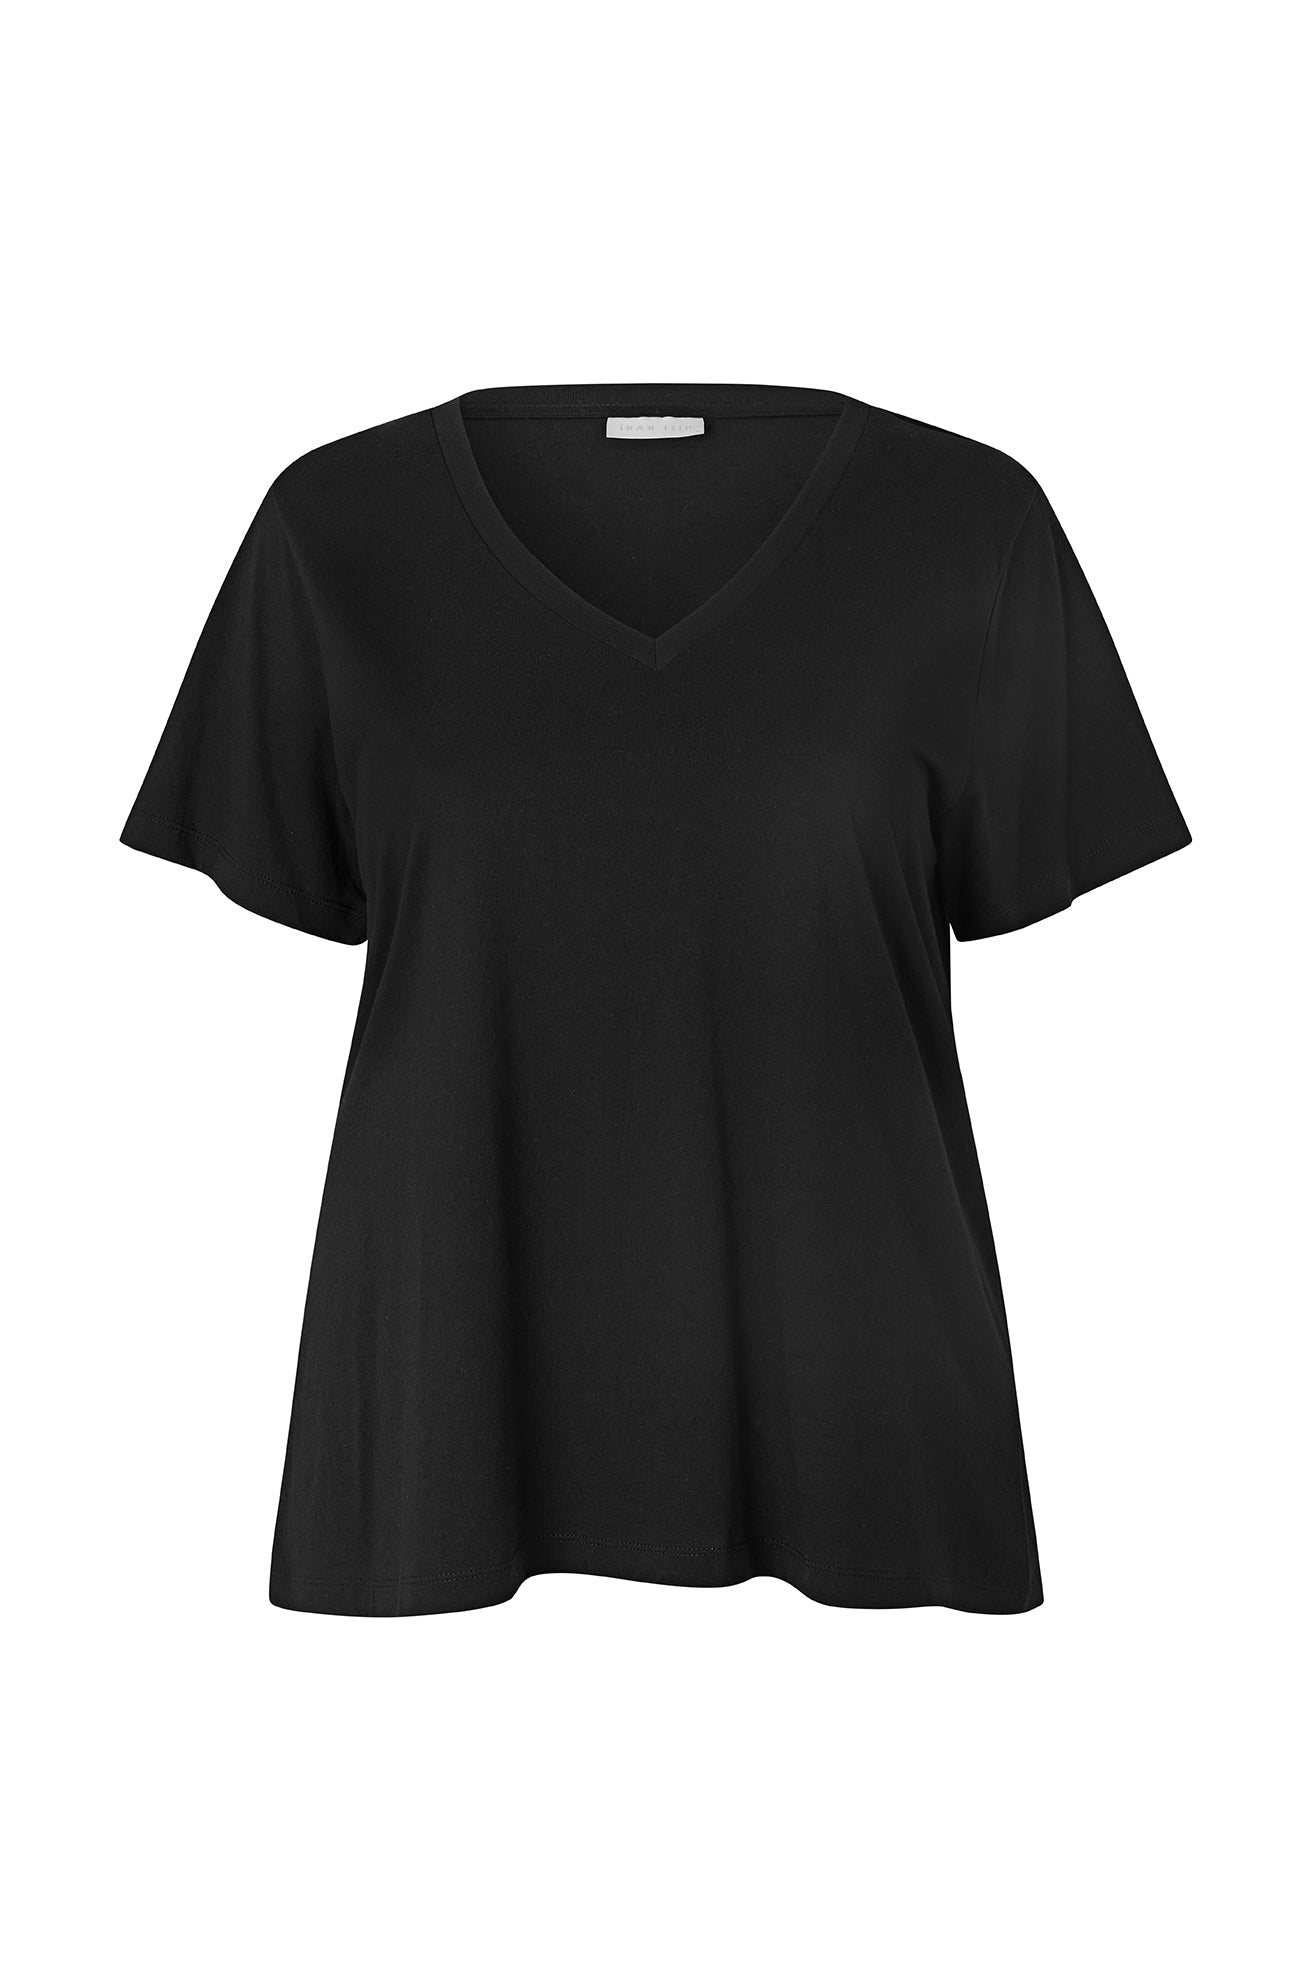 Plus Size T-Shirt | INAN ISIK